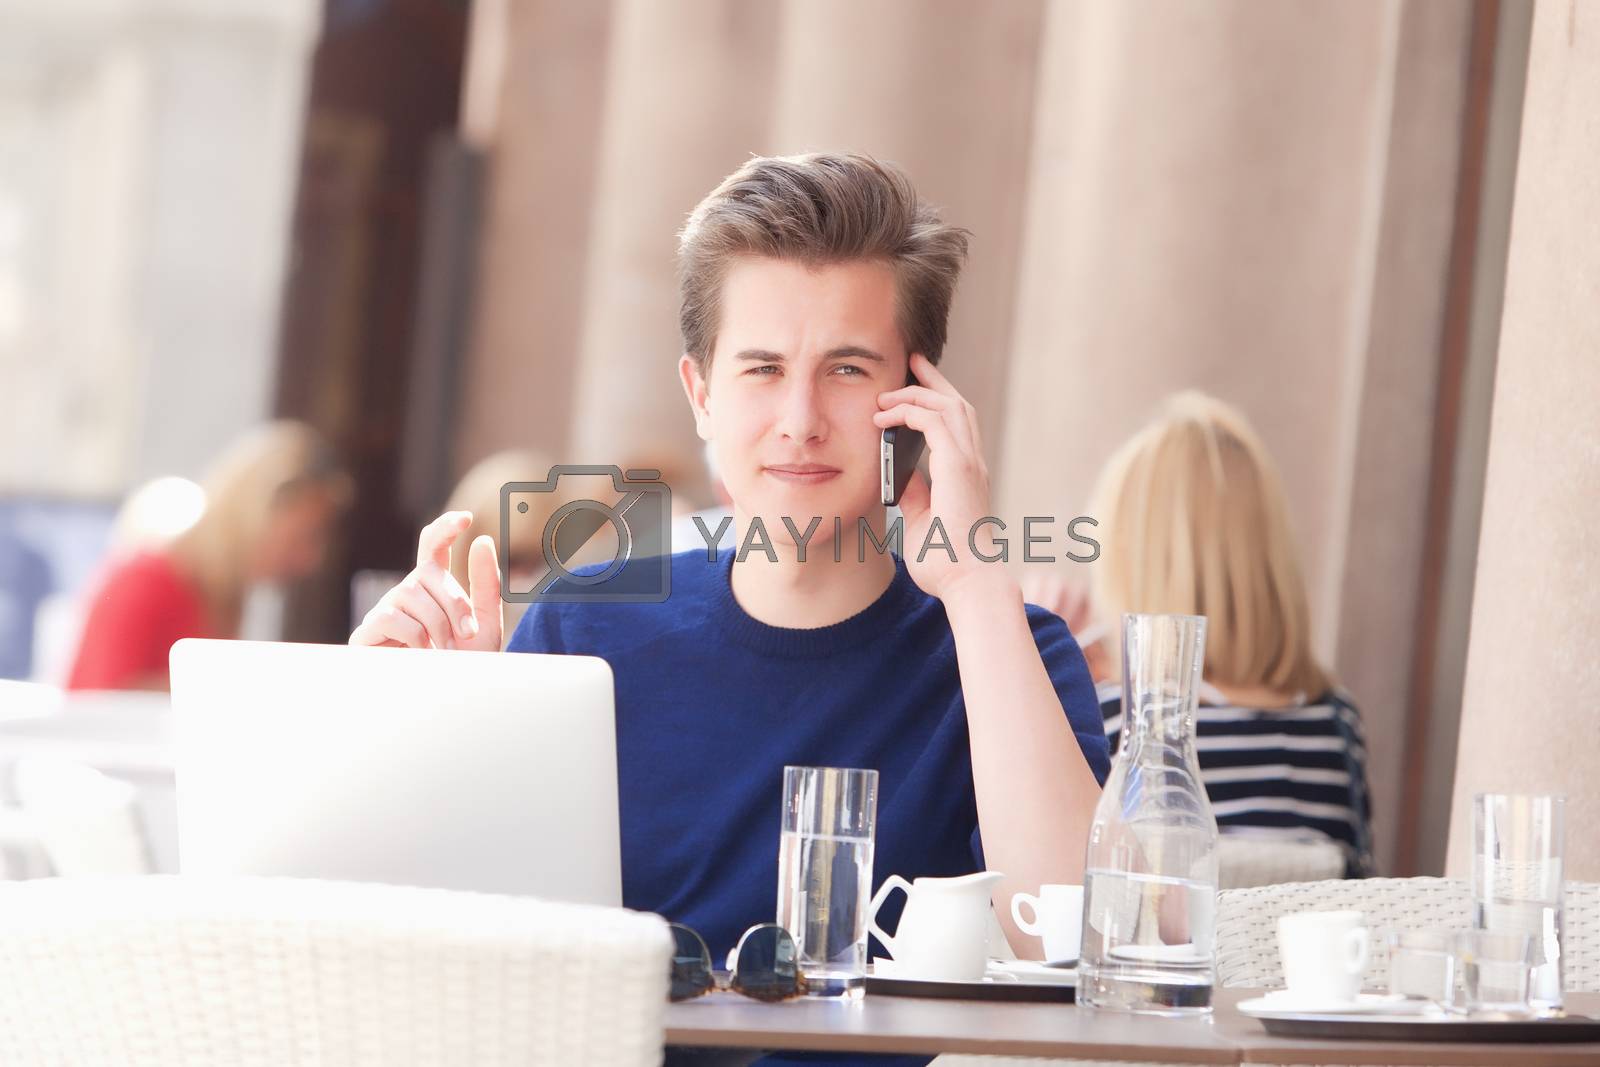 Royalty free image of Young Man Sitting in Outside Coffeehouse Talking on Phone by courtyardpix